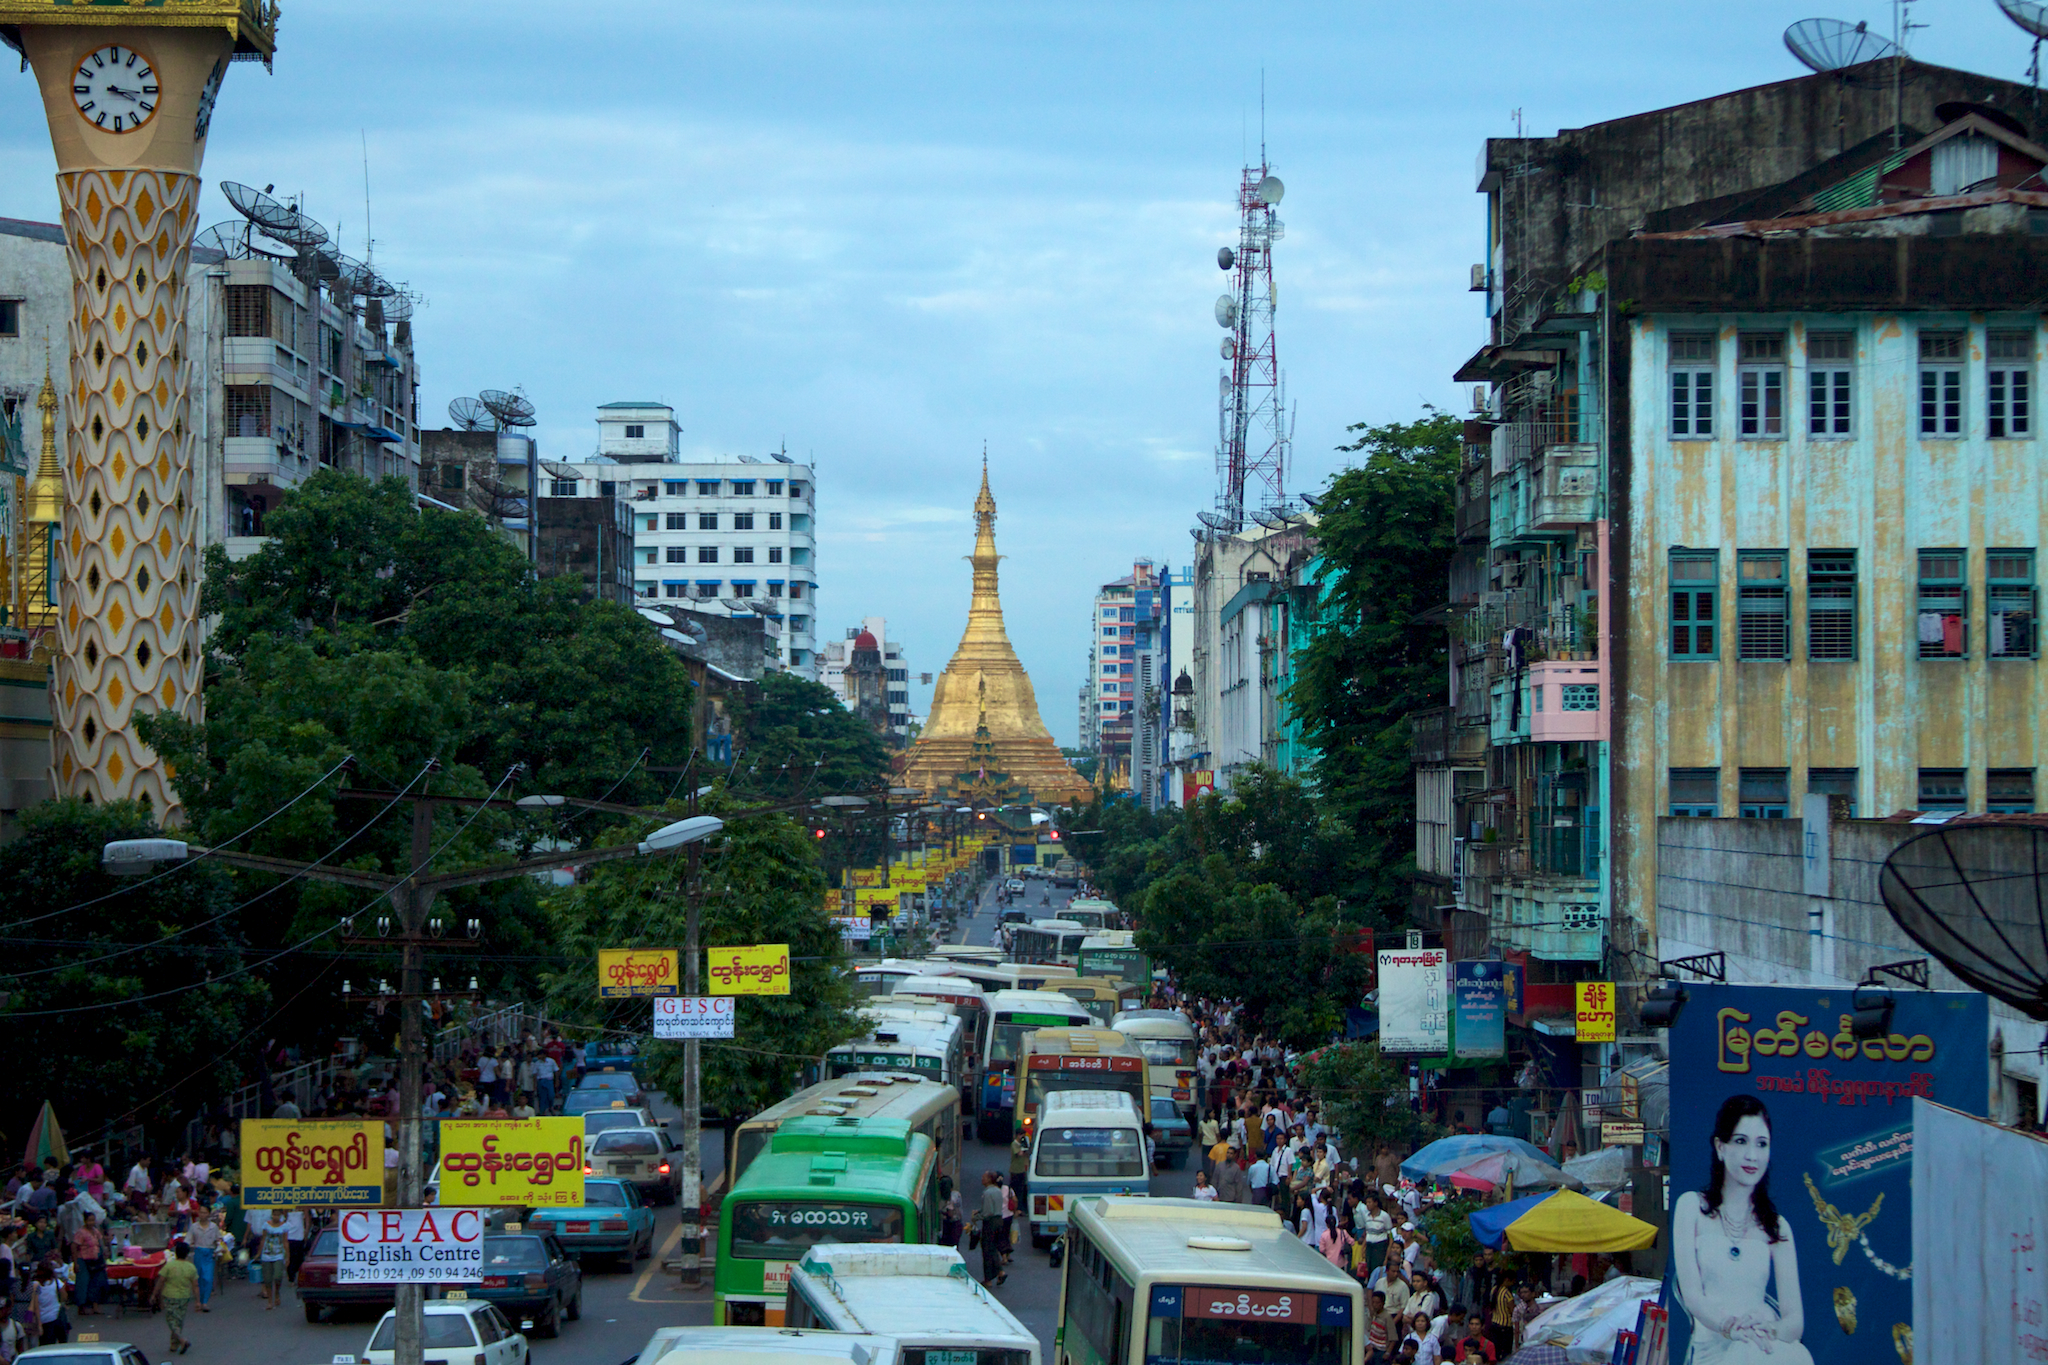 It is not every city that has a large gold paya (pagoda) sprouting from its main traffic circle. Visible from much of downtown, Sule Paya is one of the several dramatic Buddhist pagoda in Yangon.